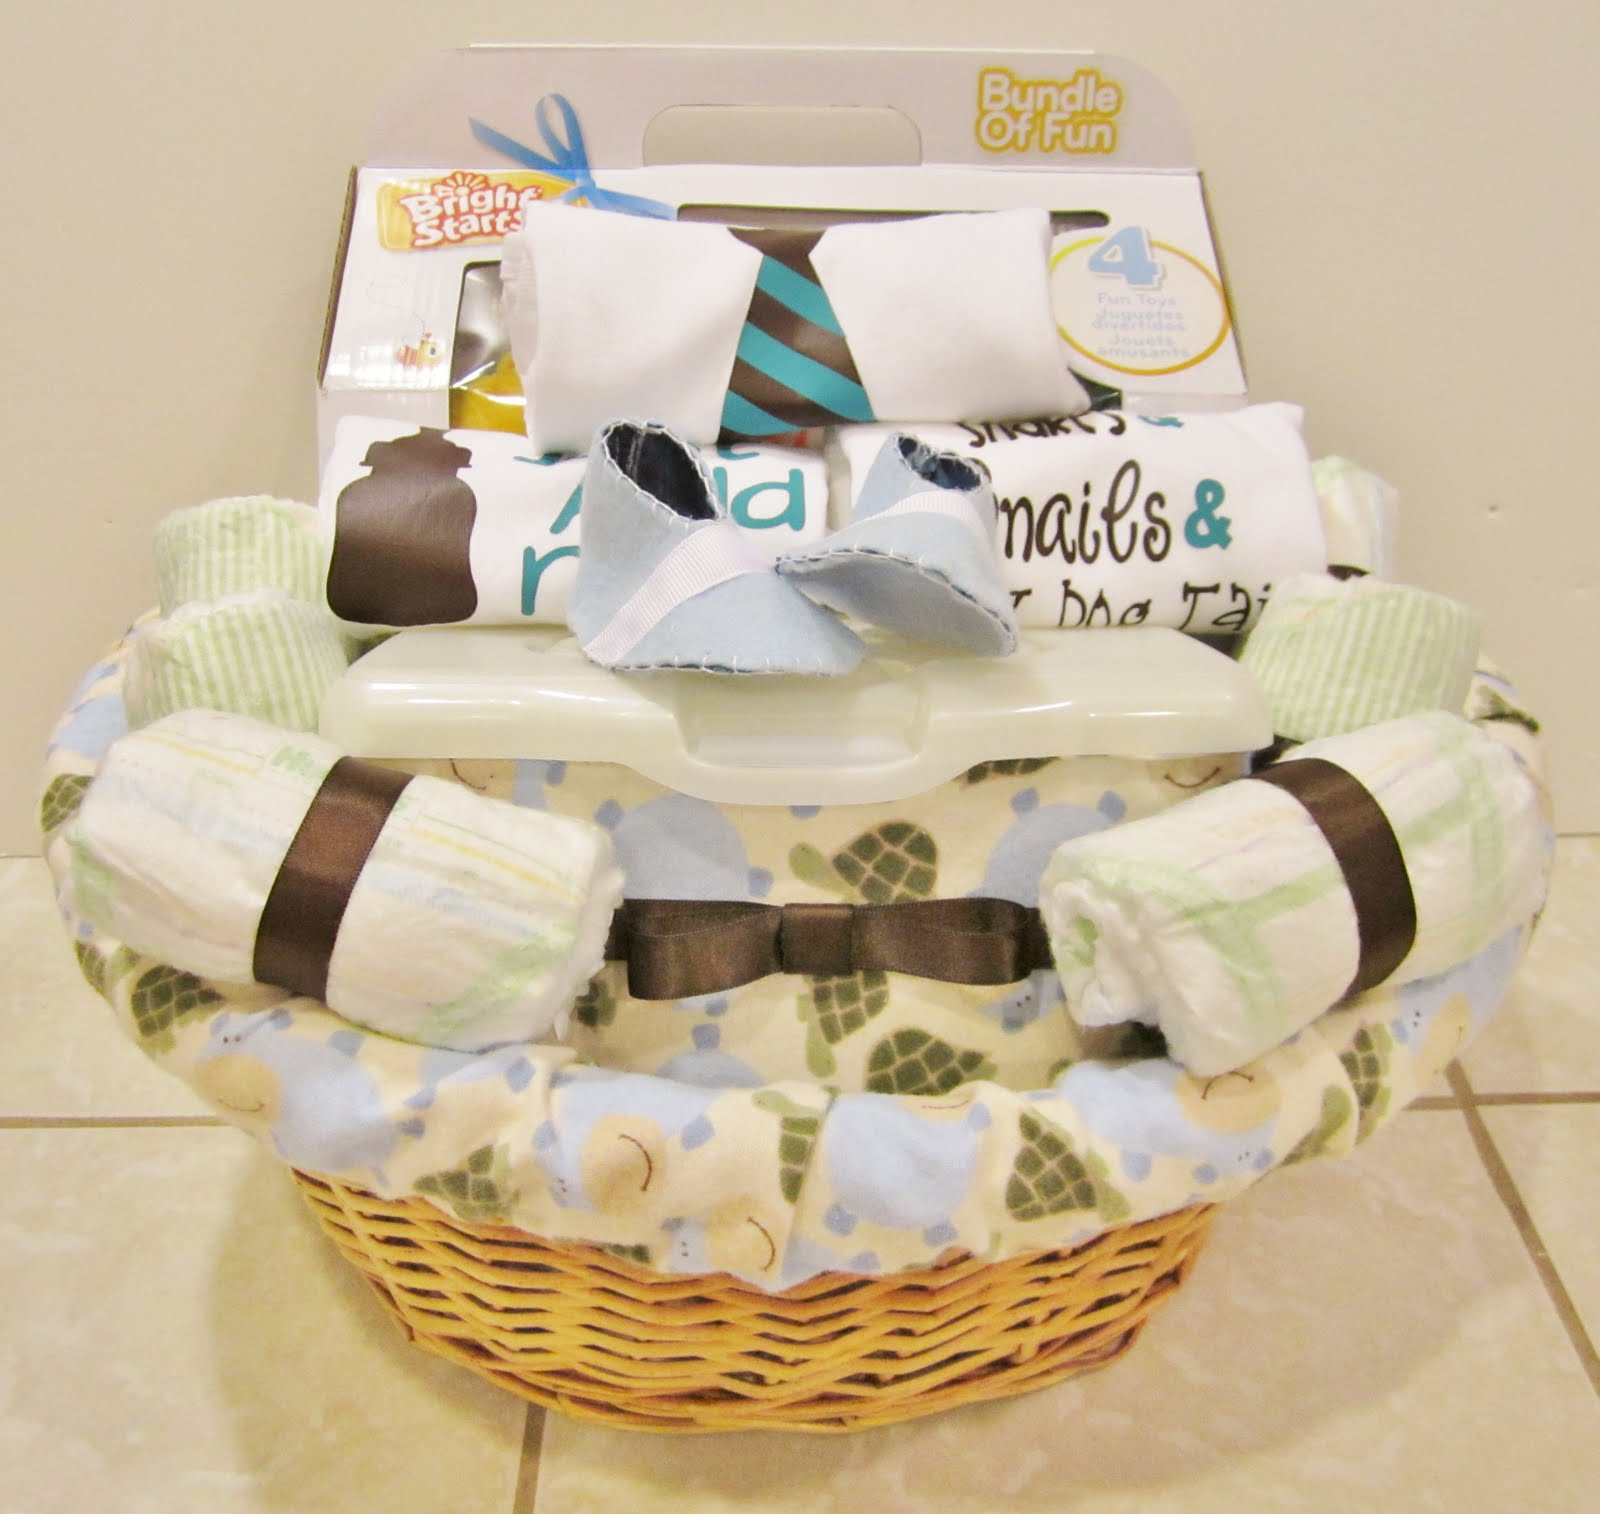 Gifts For Baby Shower Guests
 Life in the Motherhood Baby Shower Gift Basket For a